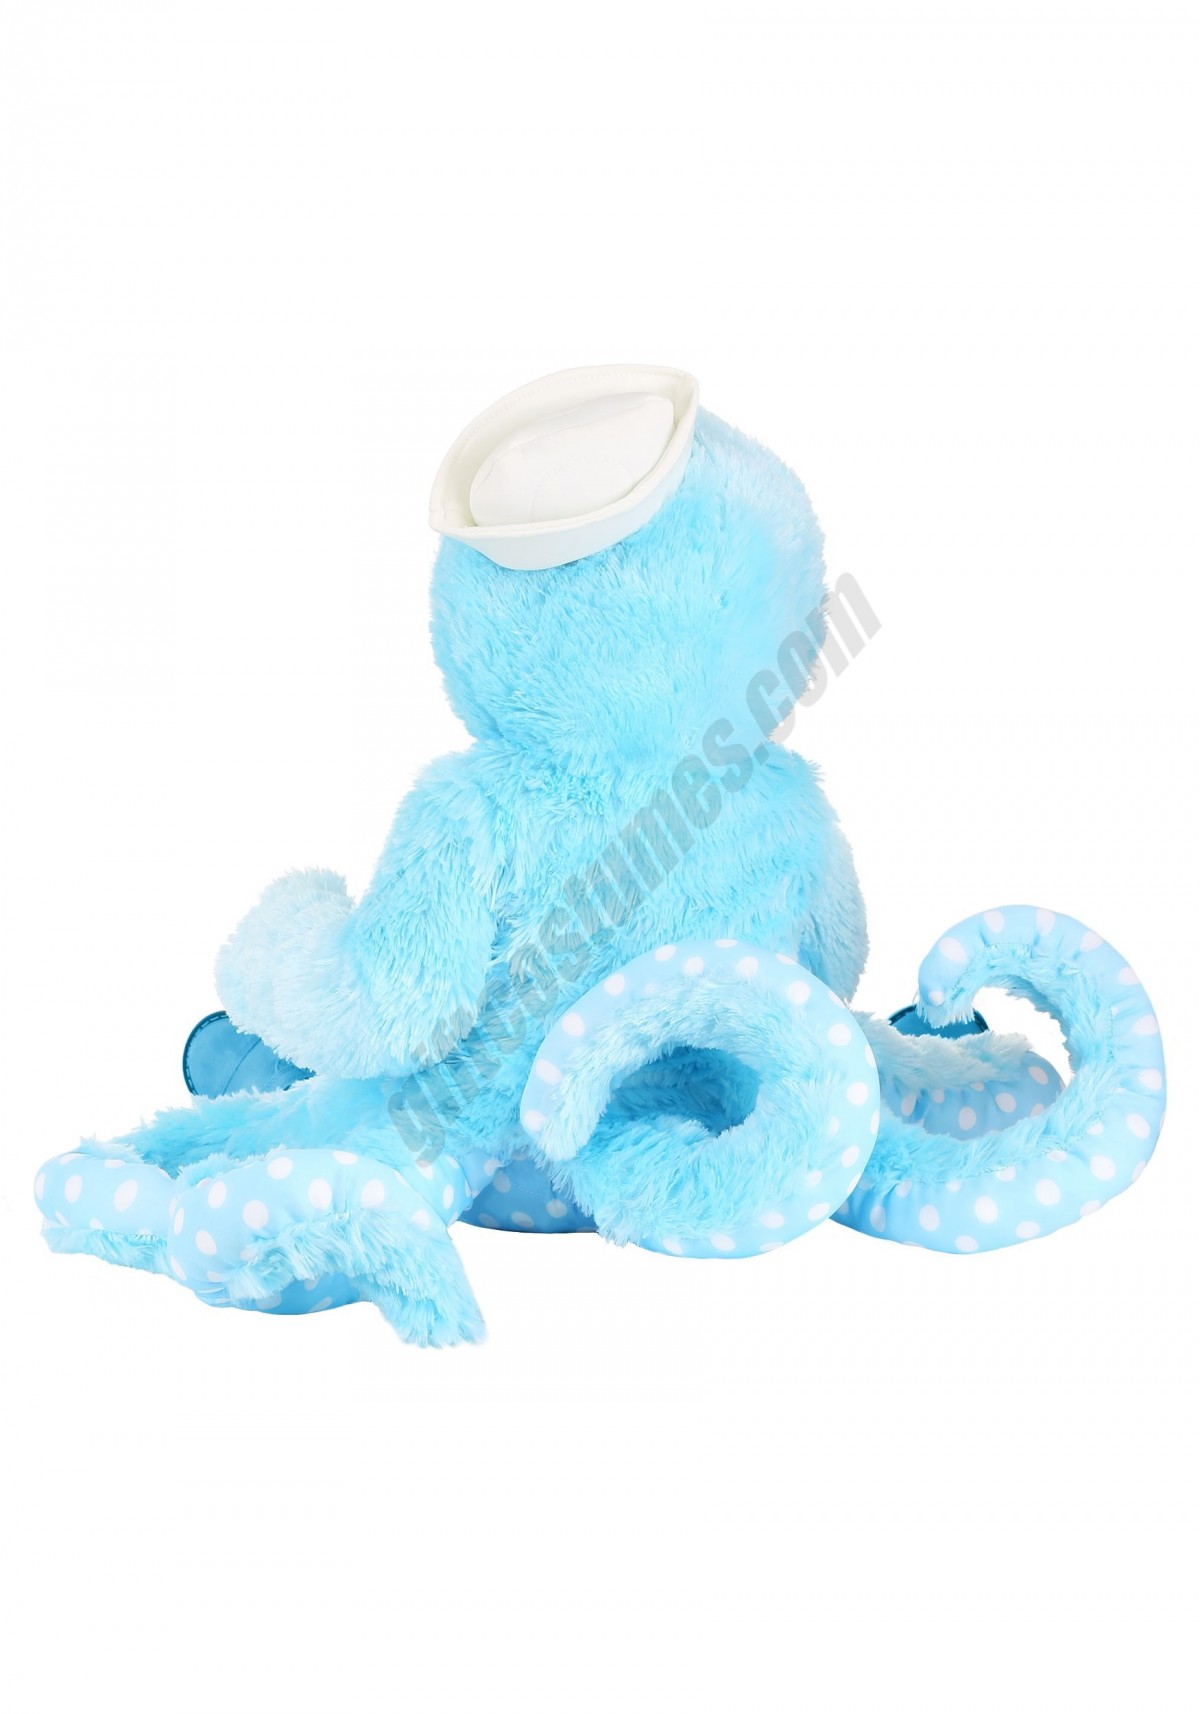 Infant/Toddler Octopus Costume Promotions - -1